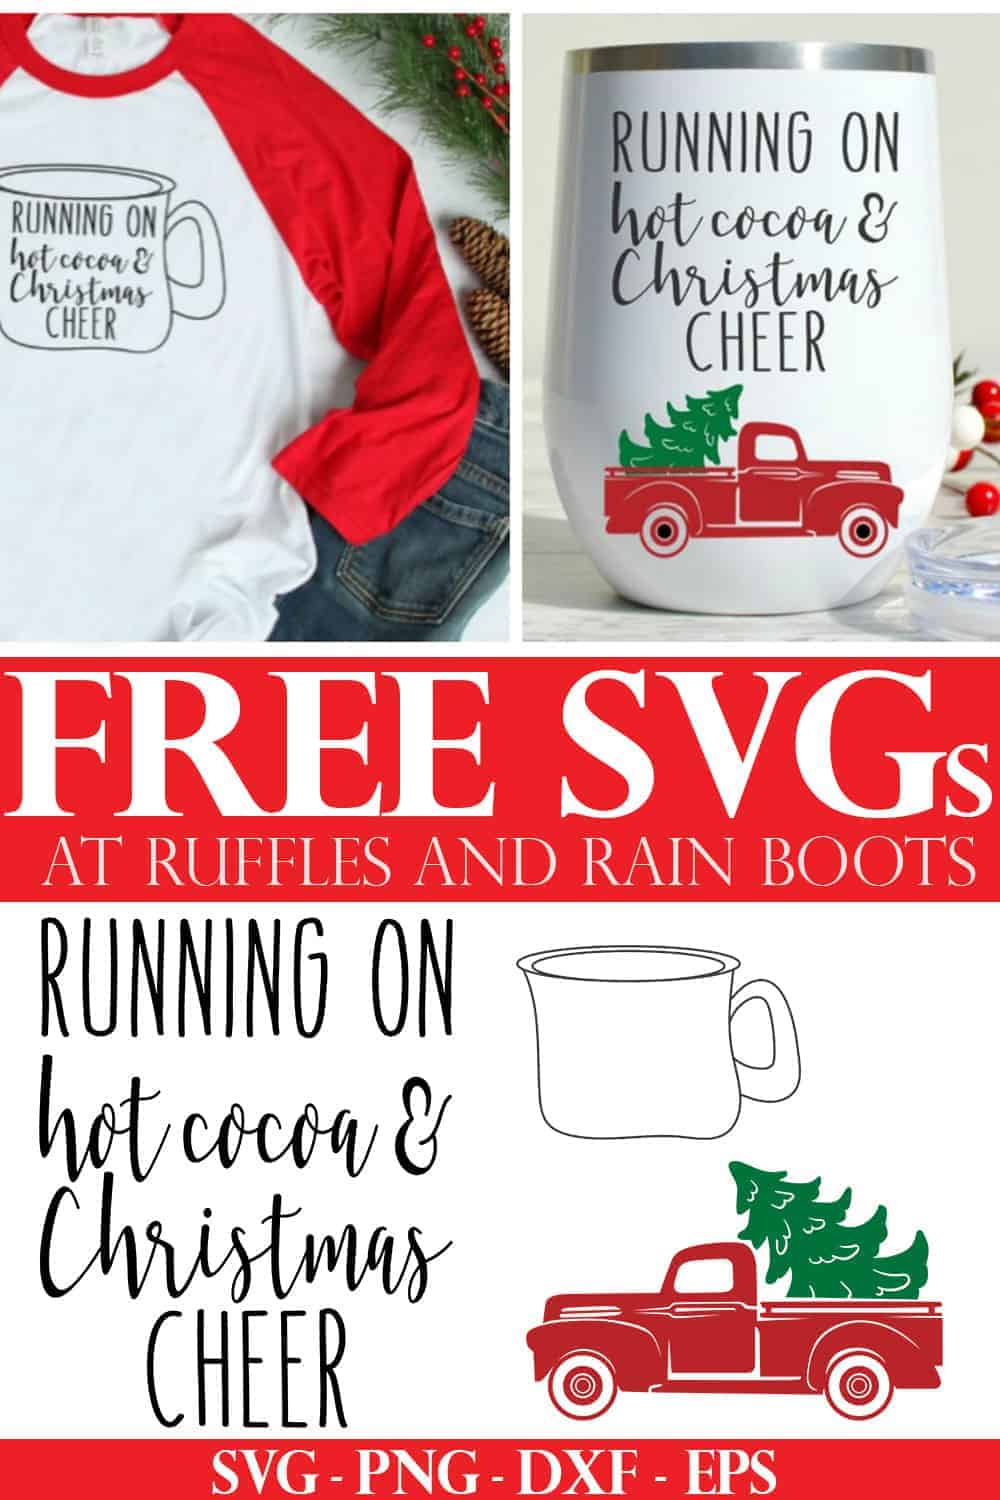 collage of Cricut Christmas crafts using the free svg Running on hot cocoa and Christmas cheer with text which reads free svg from Ruffles and Rain Boots